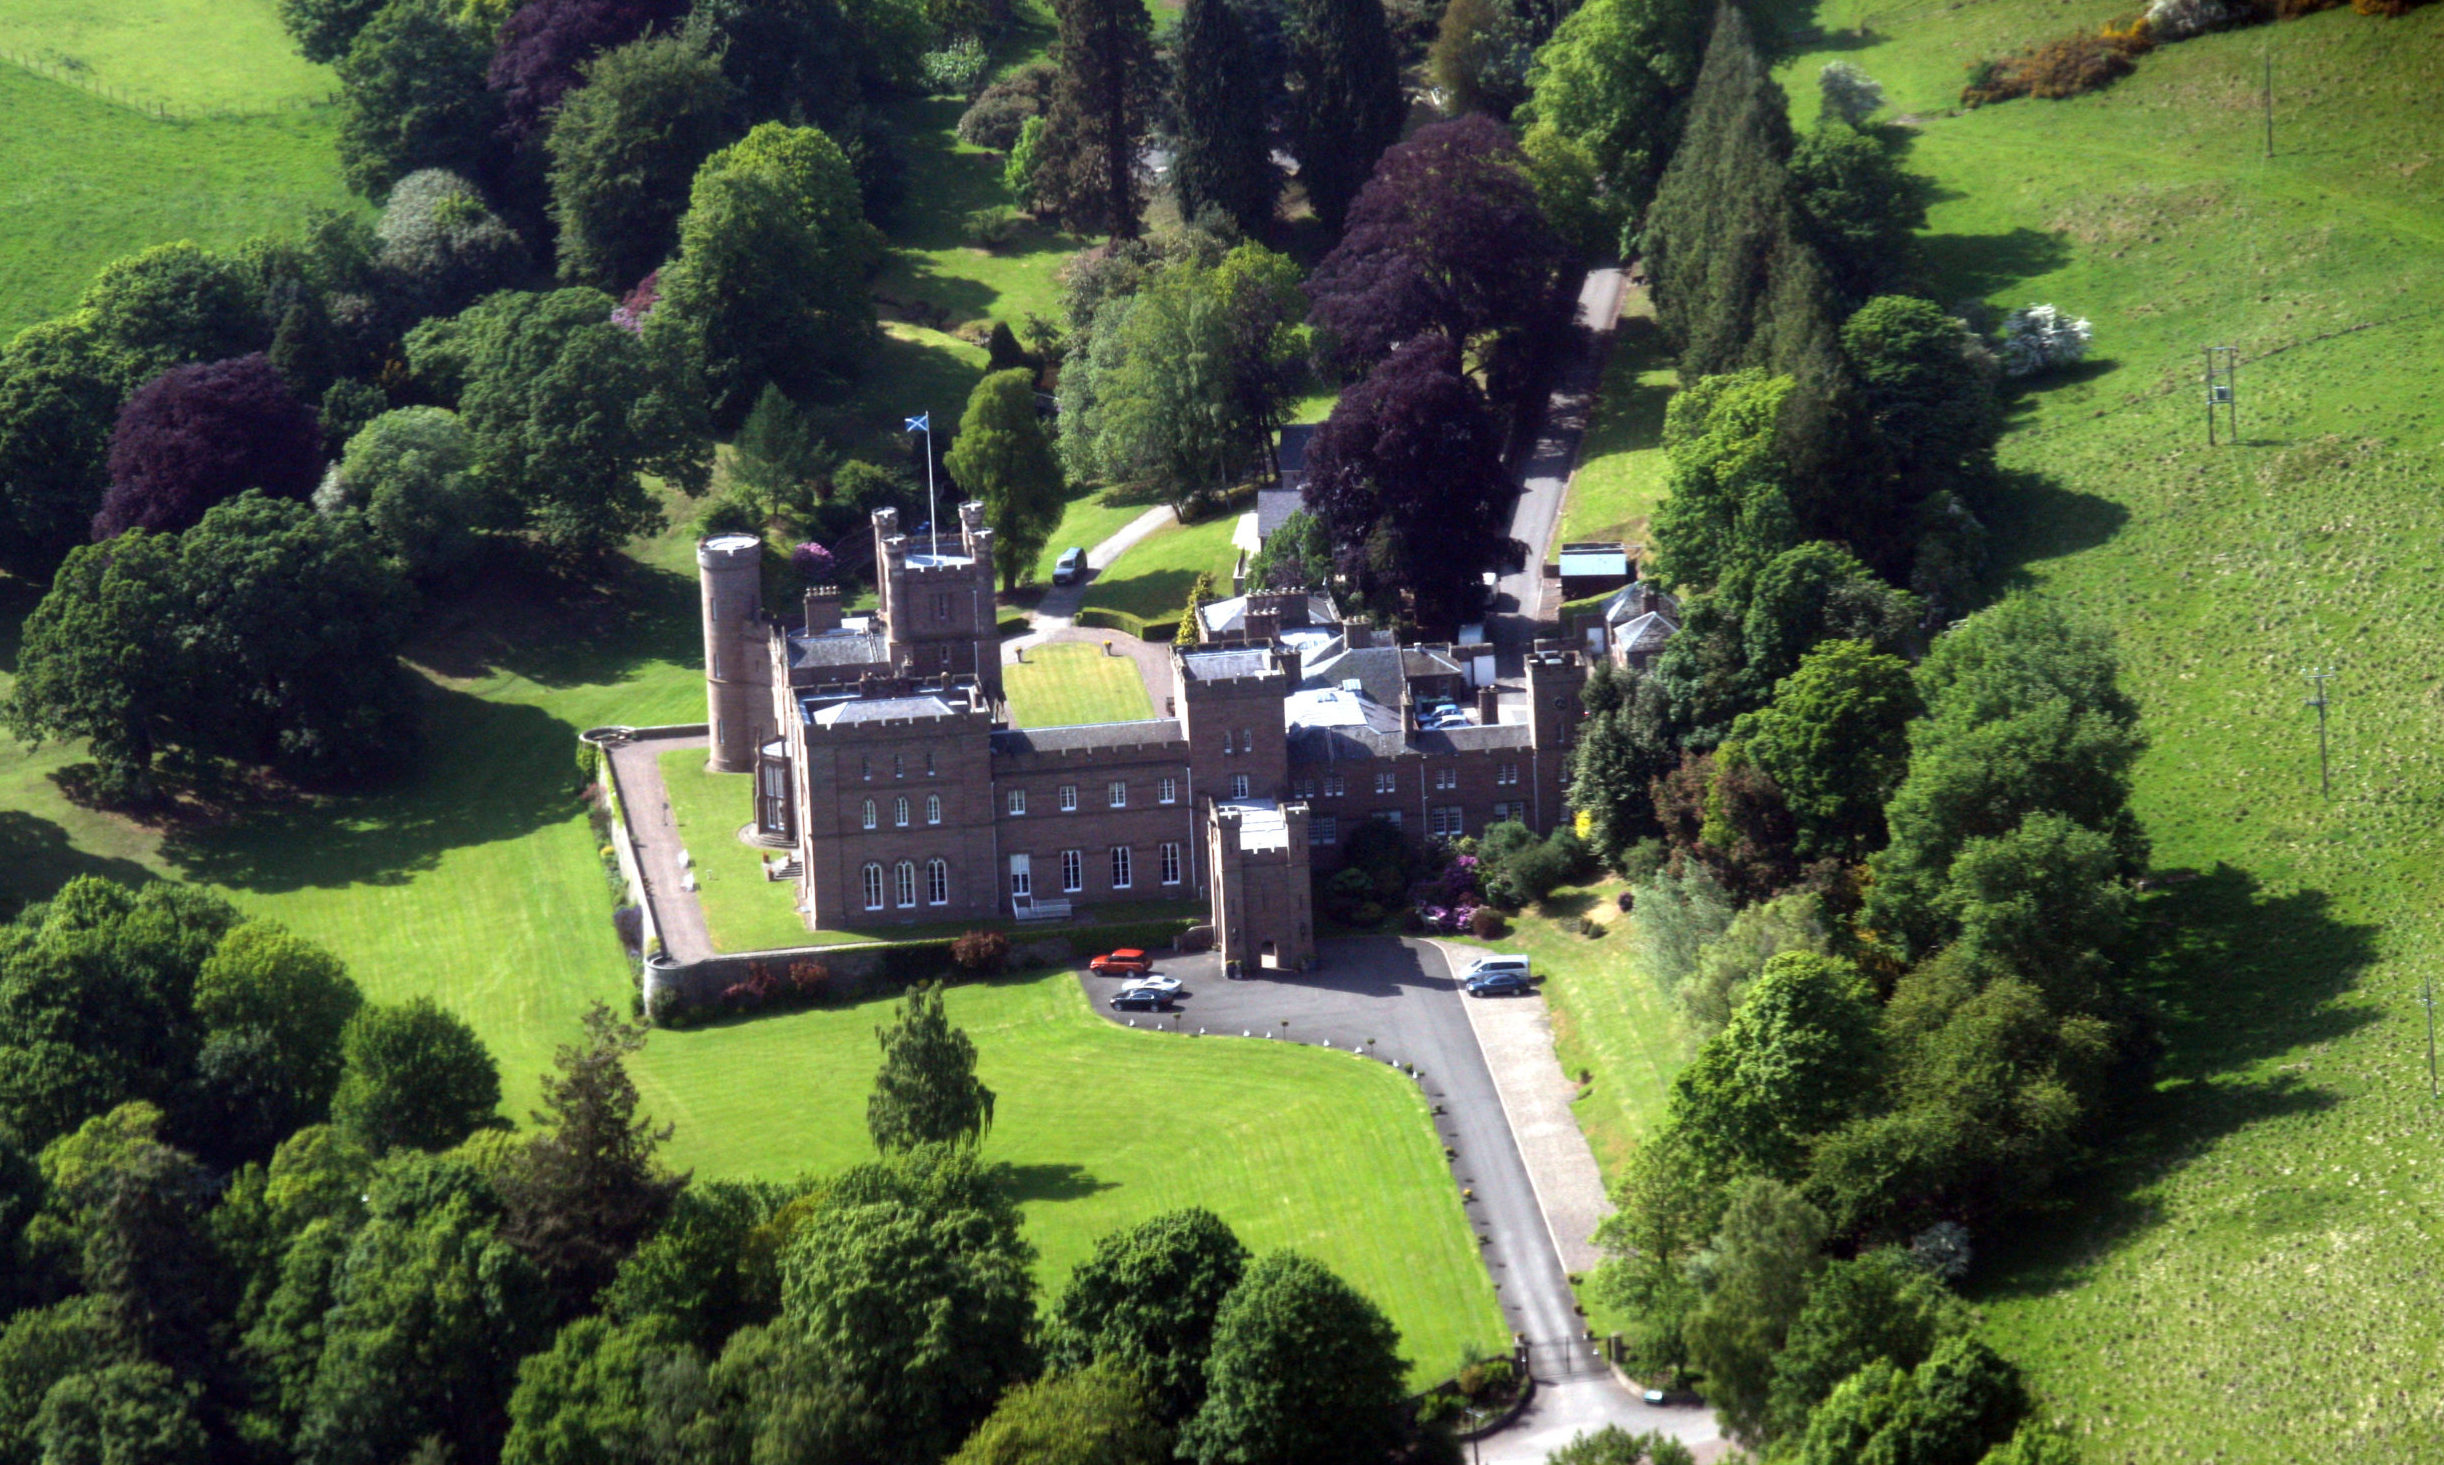 An aerial view of Kinfauns Castle.